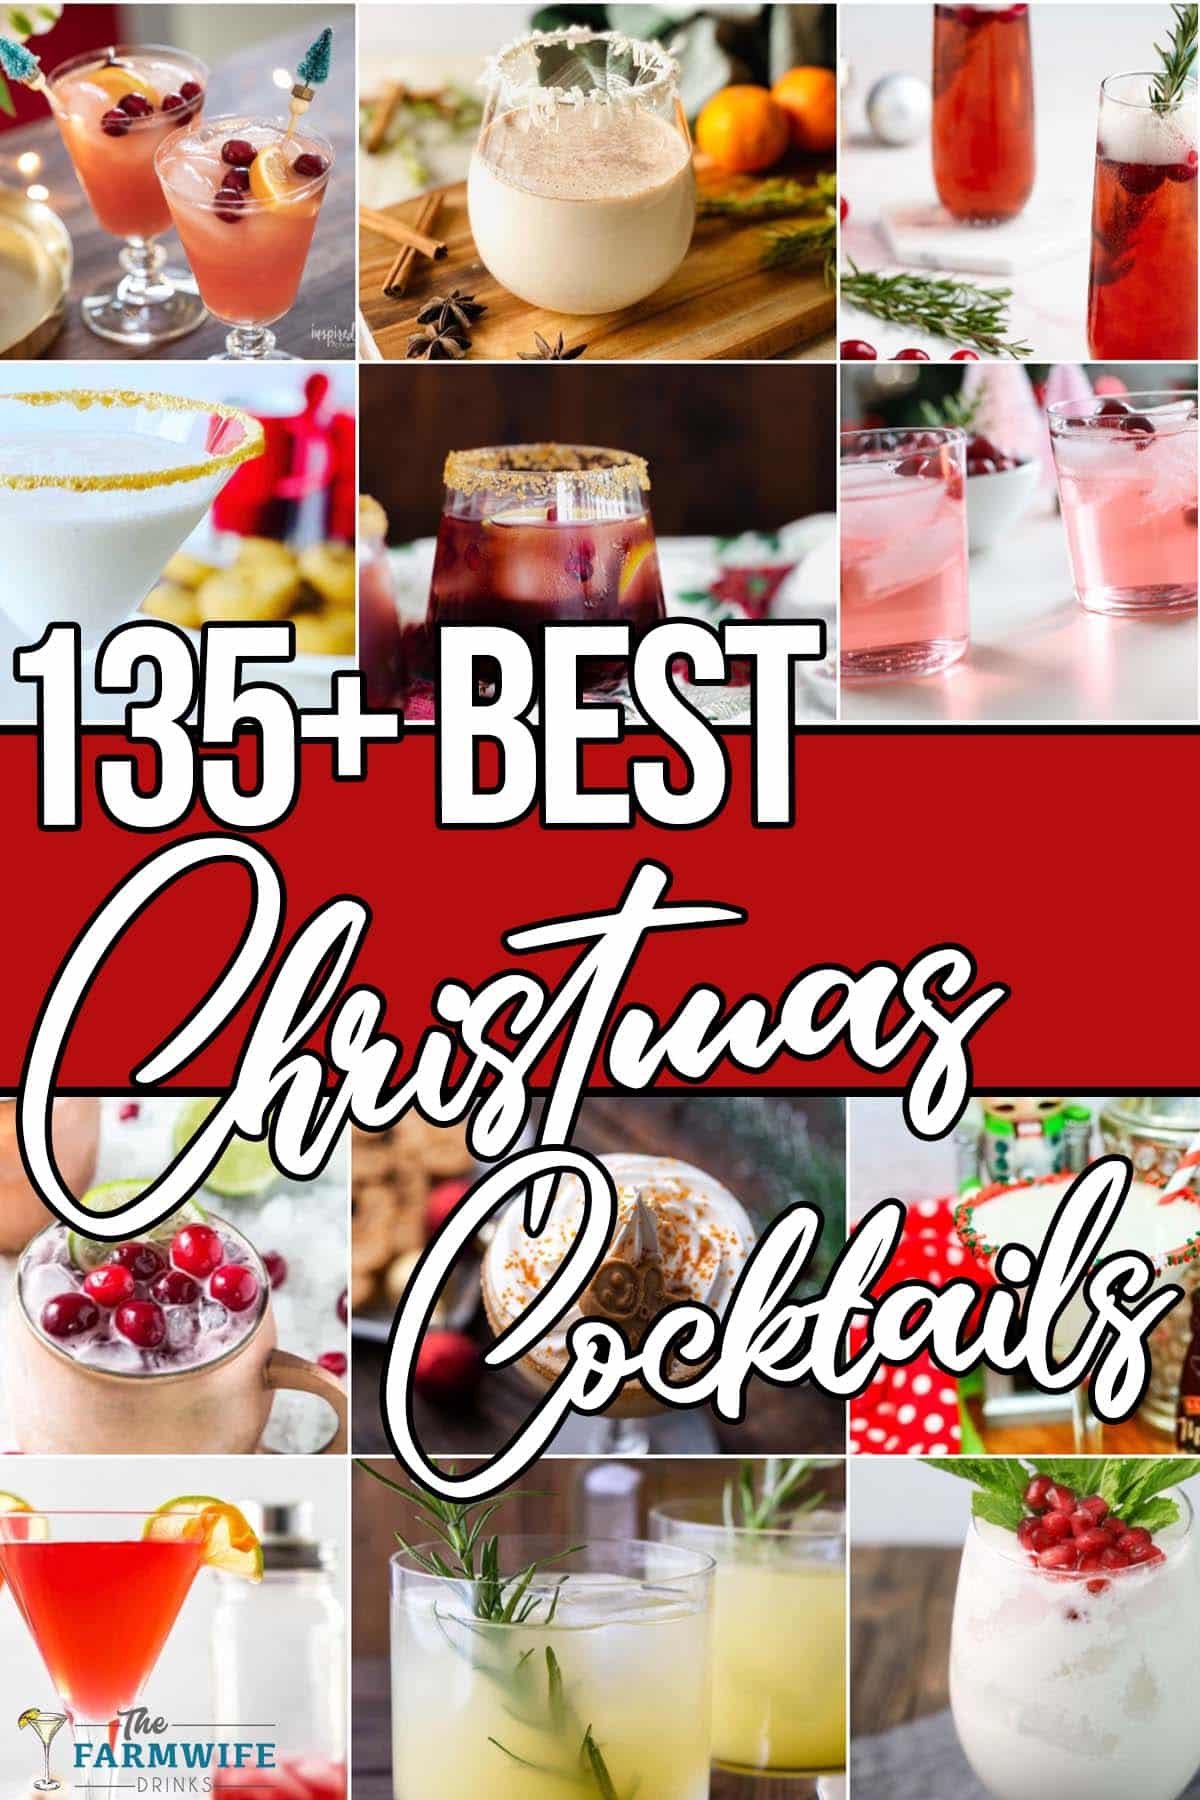 photo collage of holiday drink recipes with text which reads 135+ best christmas cocktails